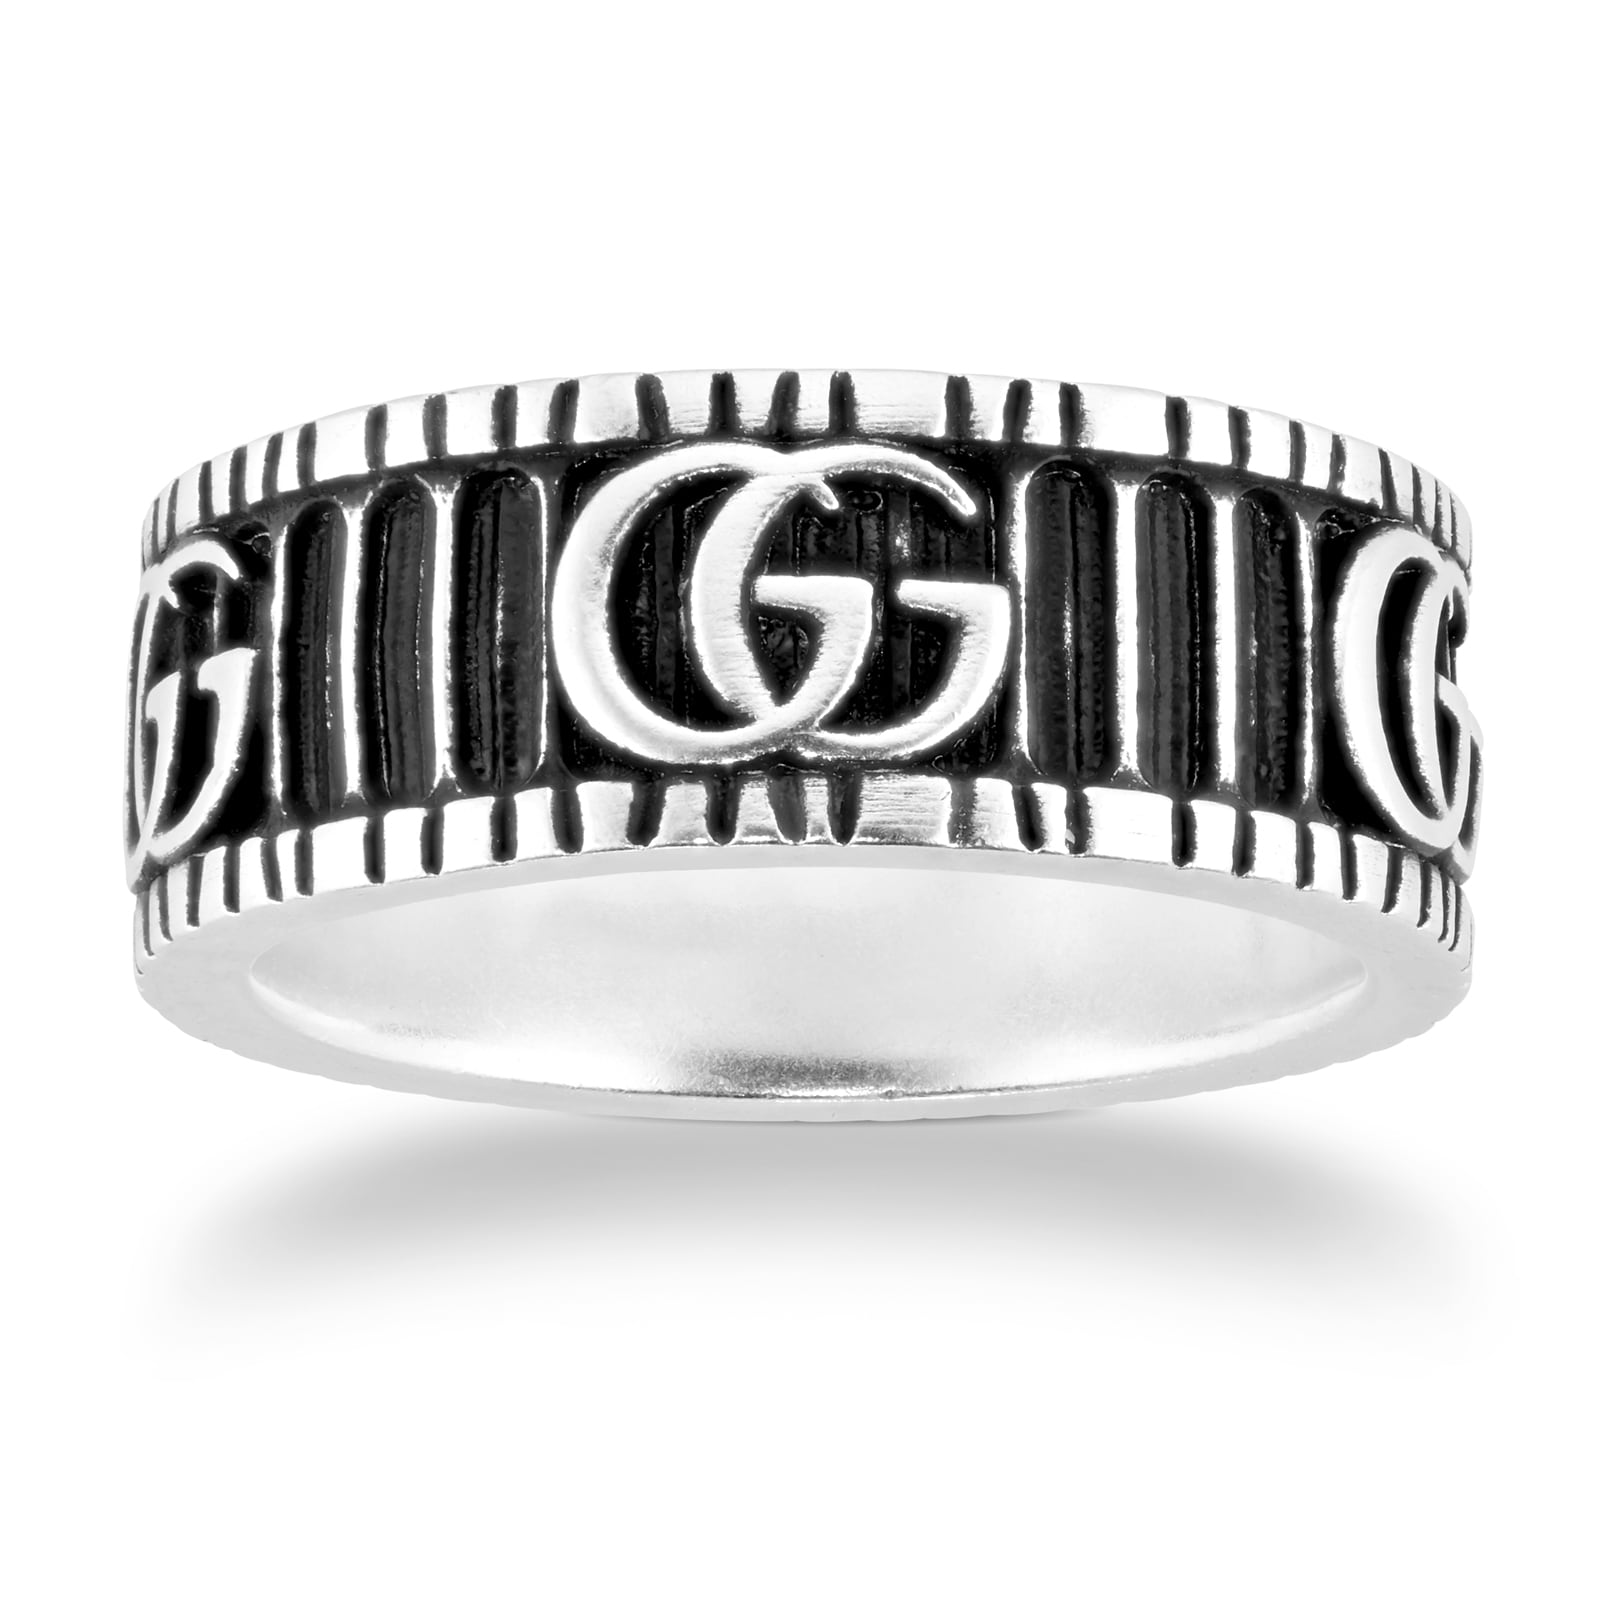 Gg Marmont Sterling Silver Ring - Ring Size M